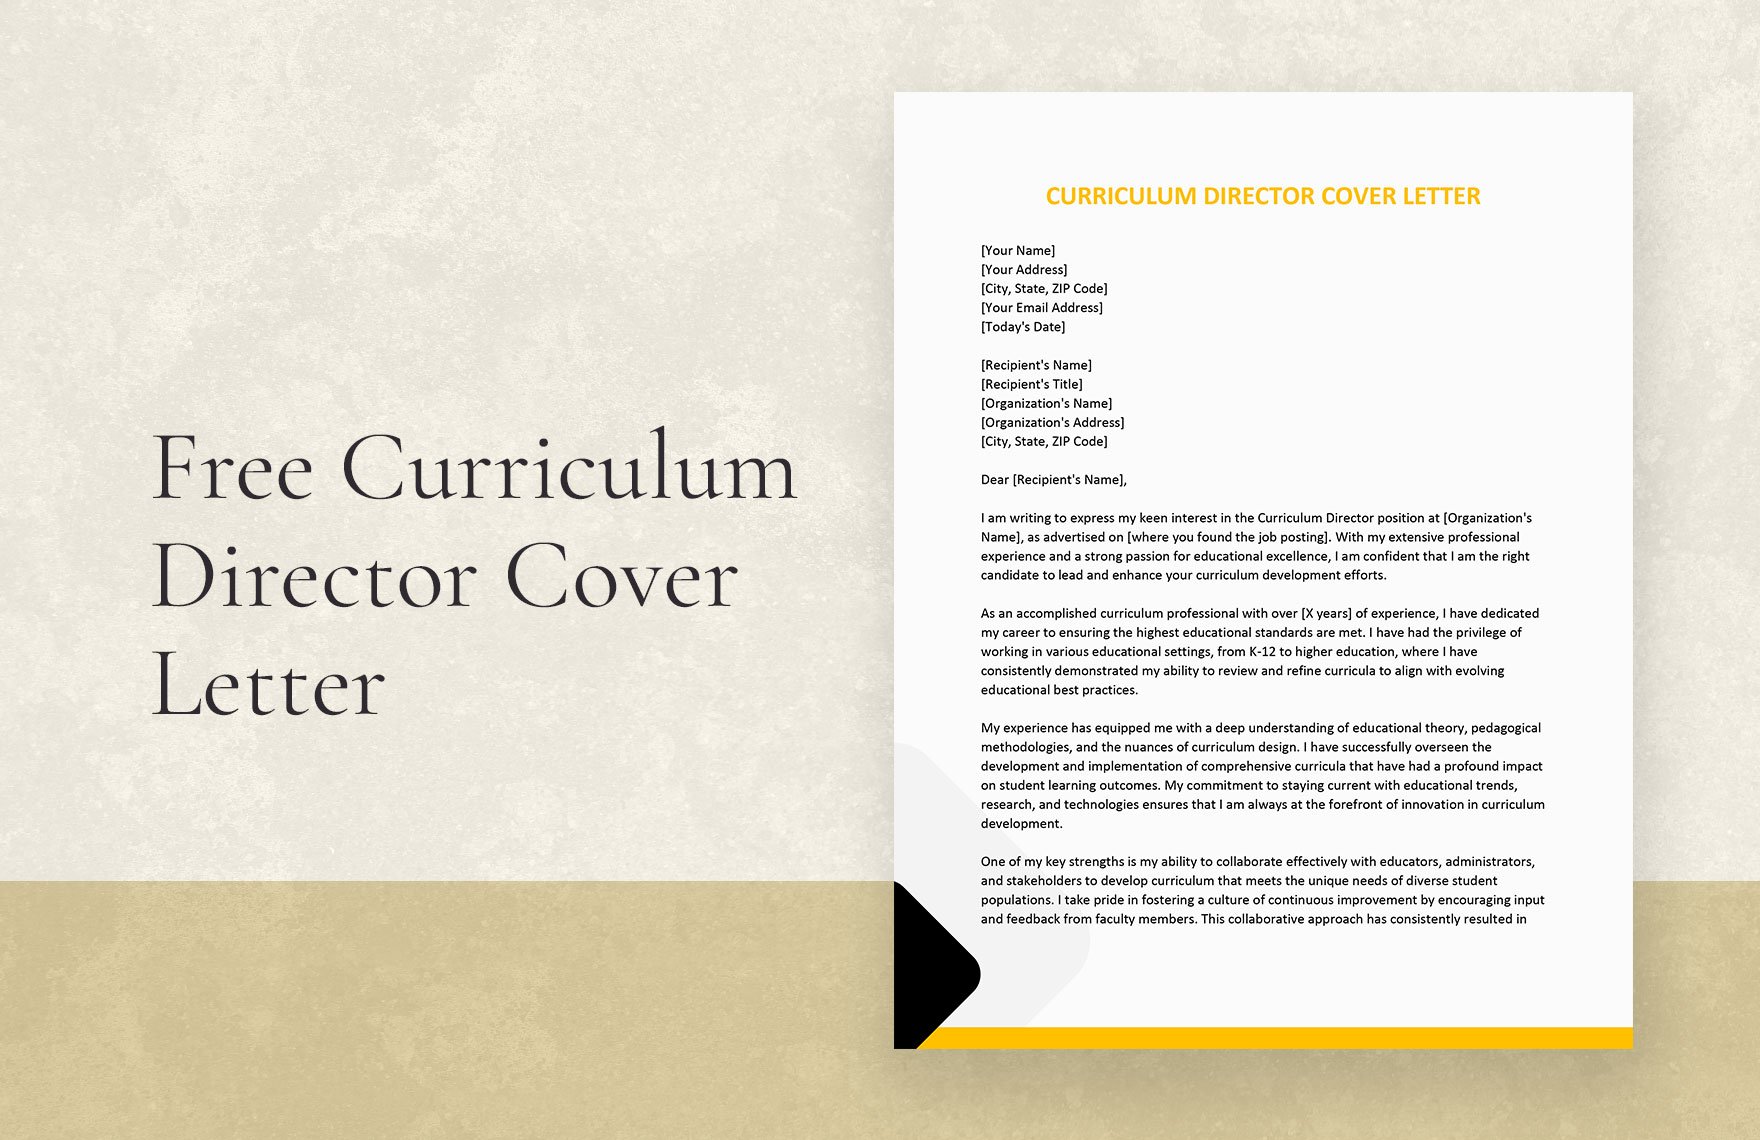 Curriculum Director Cover Letter in Word, Google Docs, Apple Pages